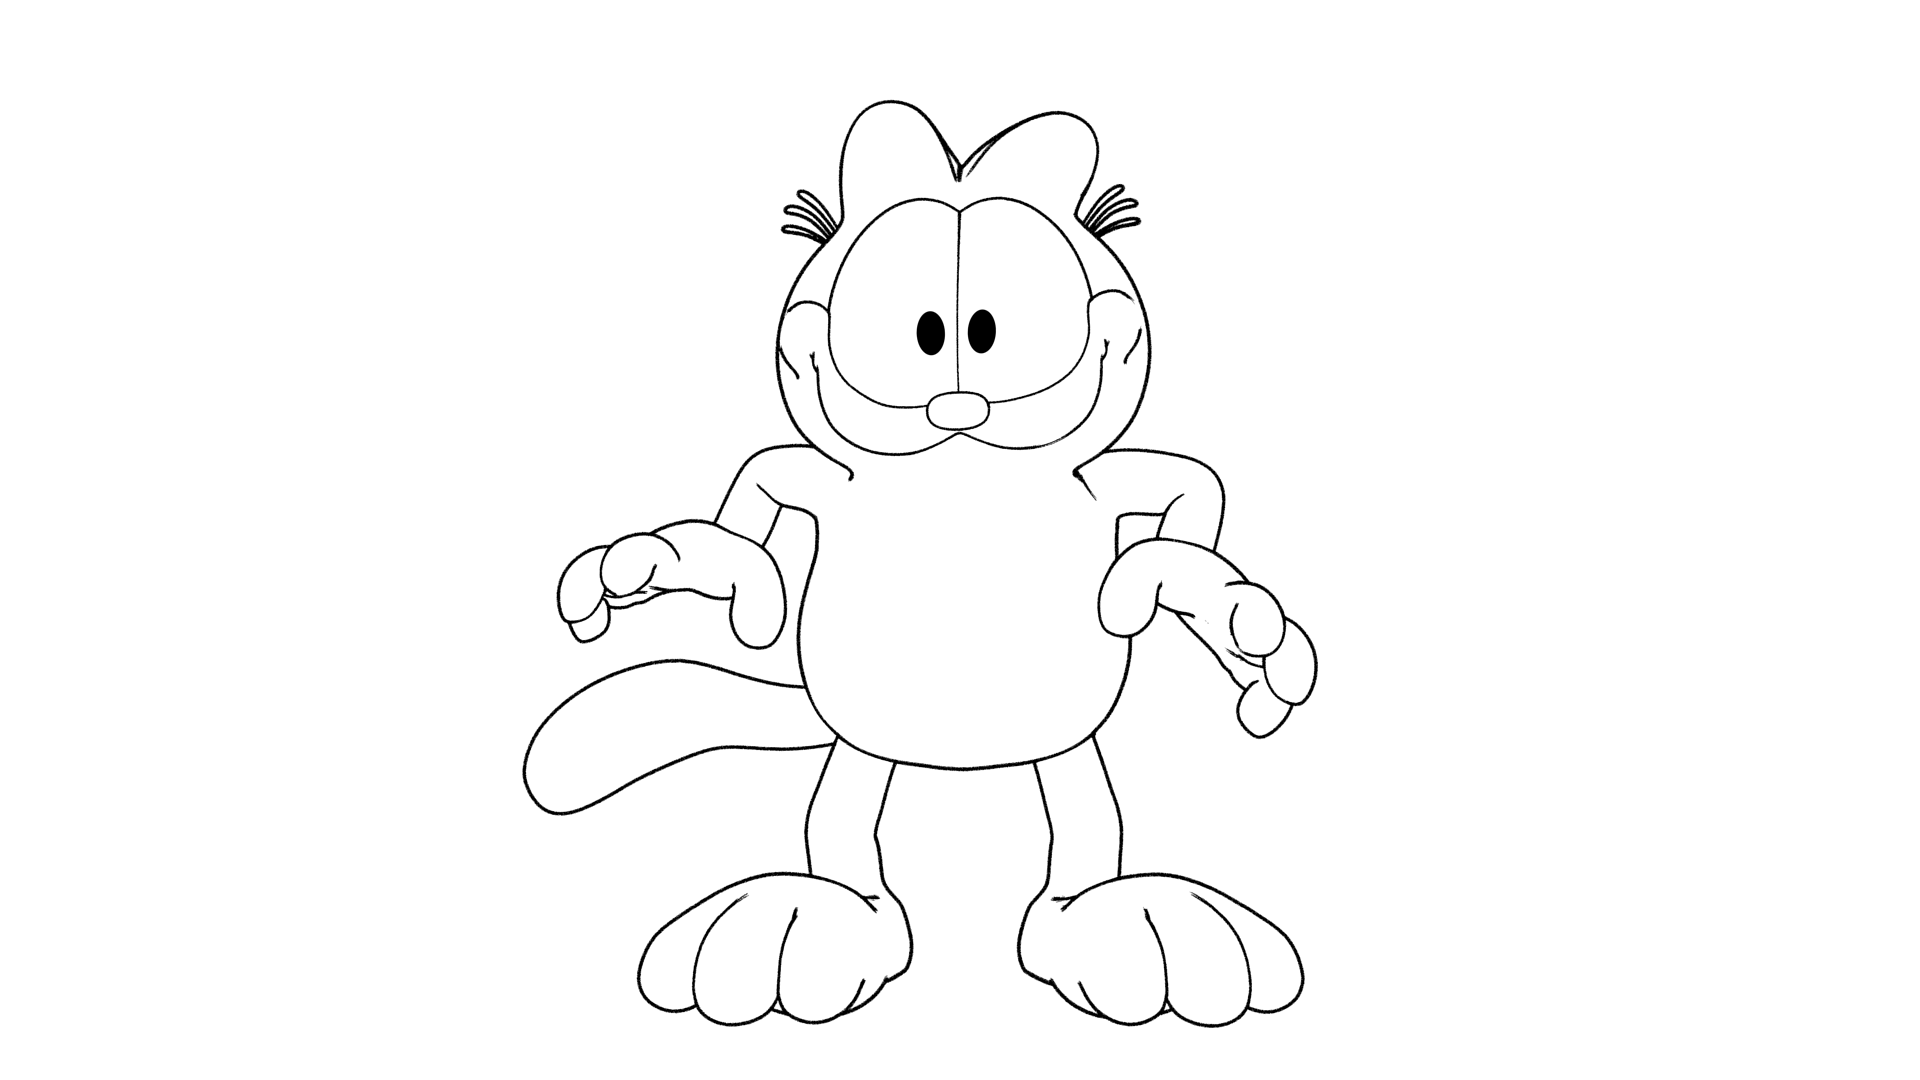 Coloriage Garfield personnage